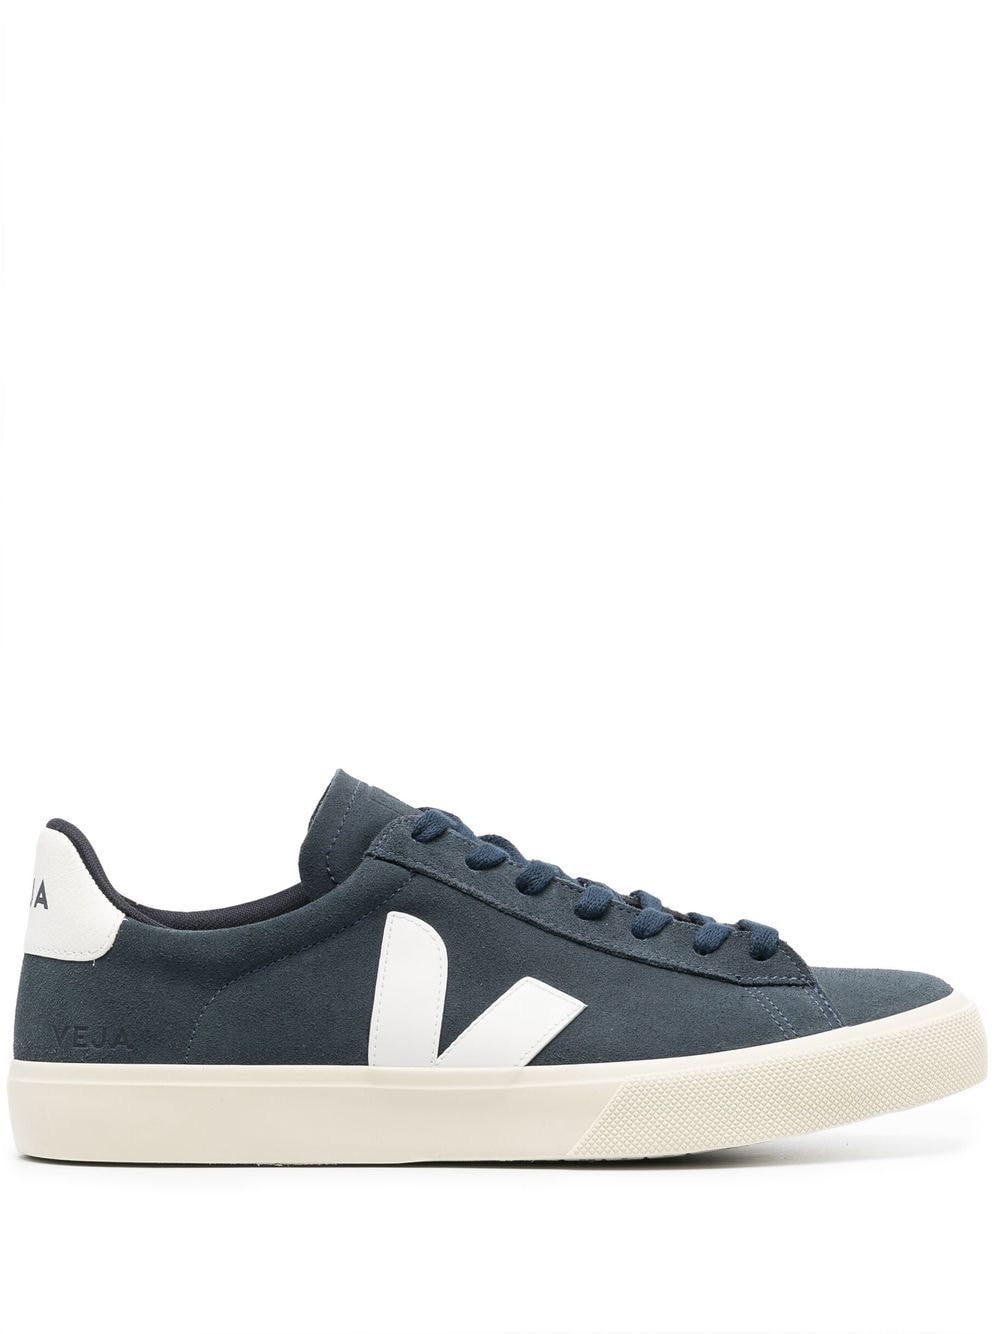 VEJA CAMPO LOW-TOP trainers